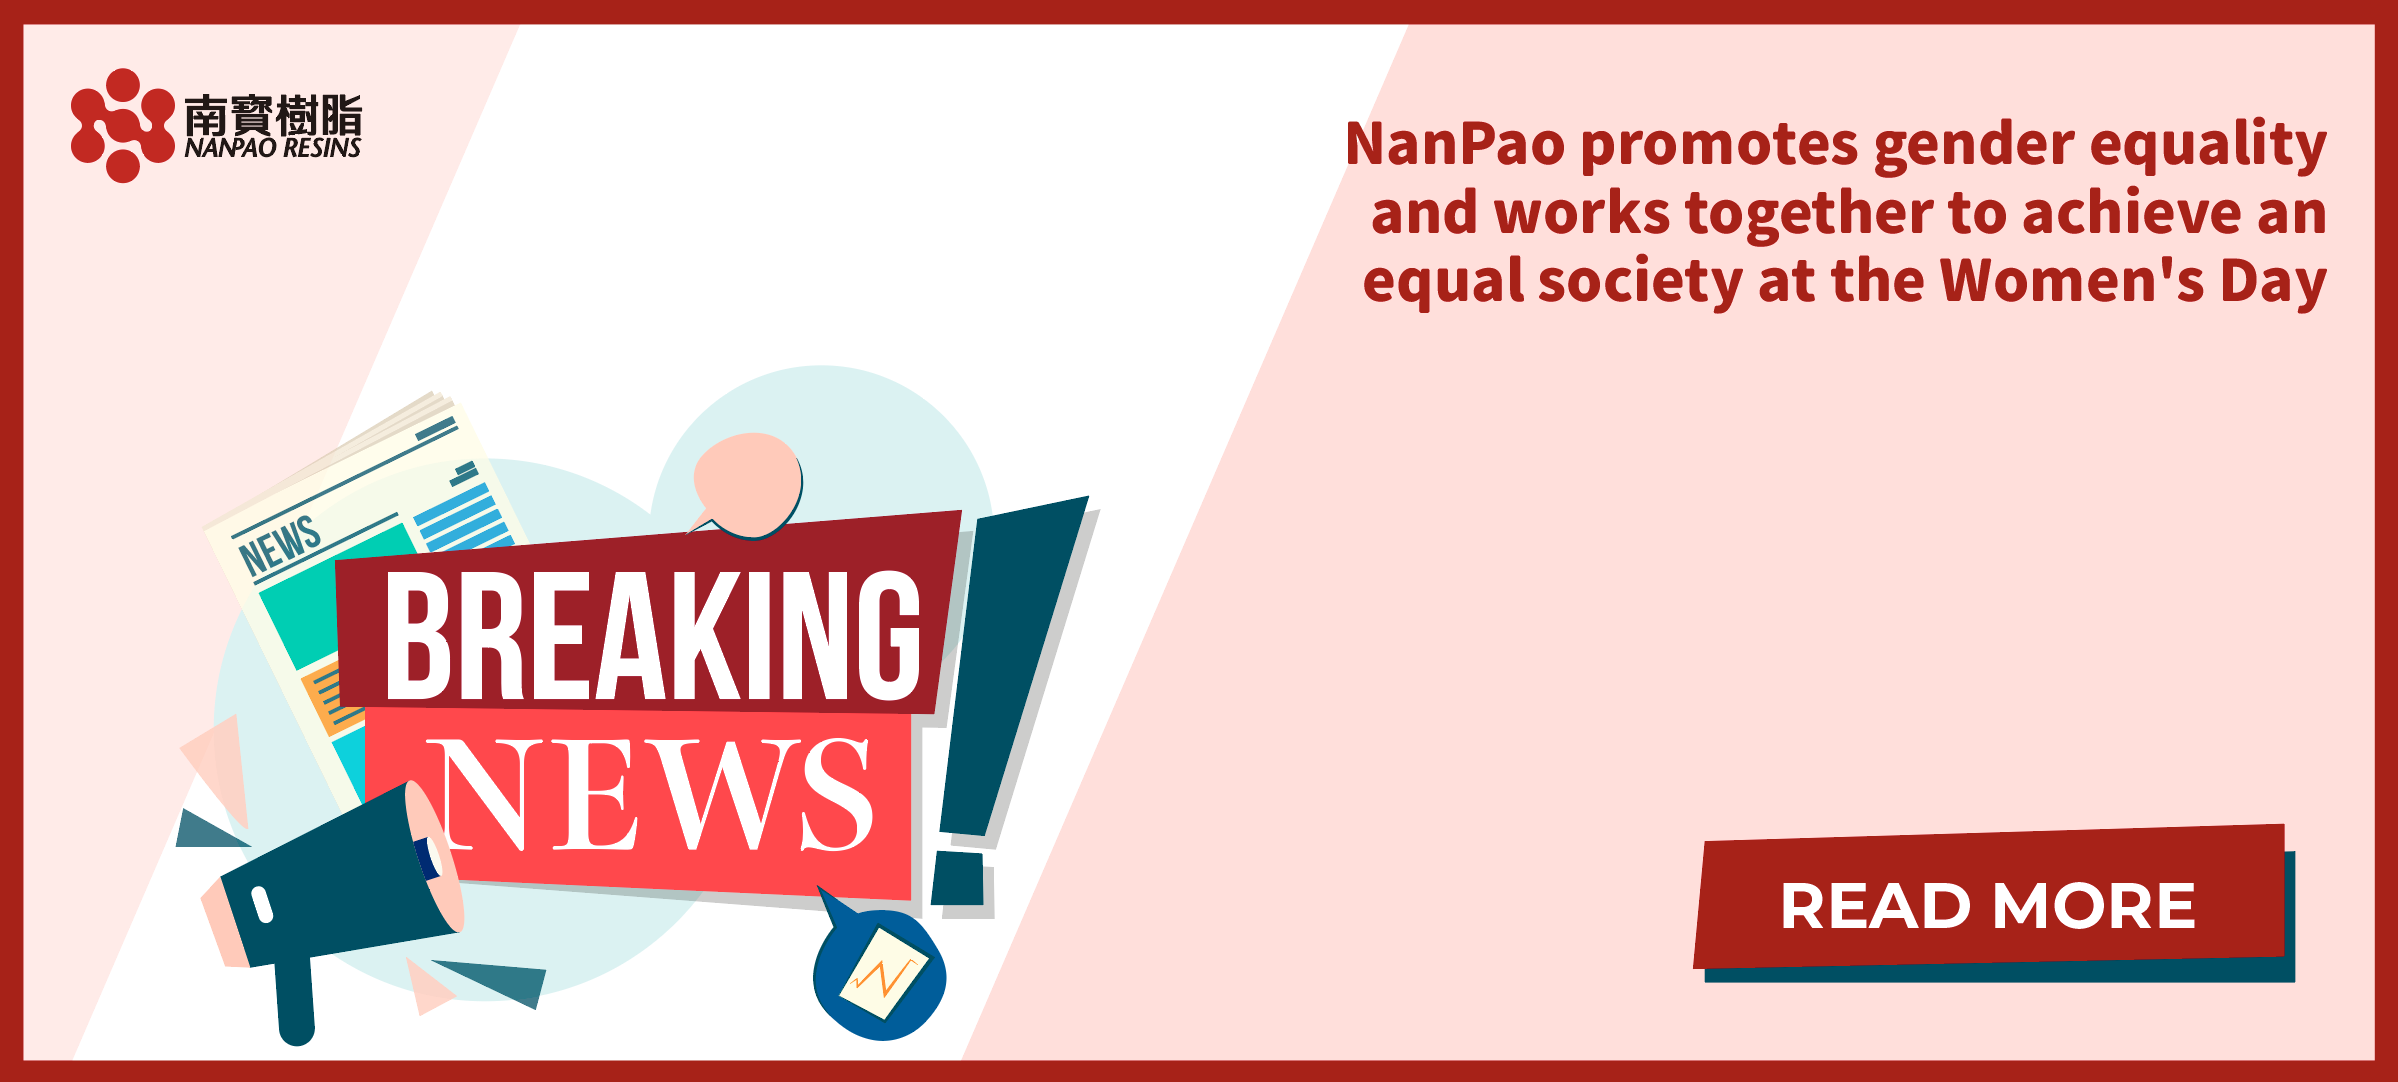 NanPao promotes gender equality and works together to achieve an equal society at the Women's Day